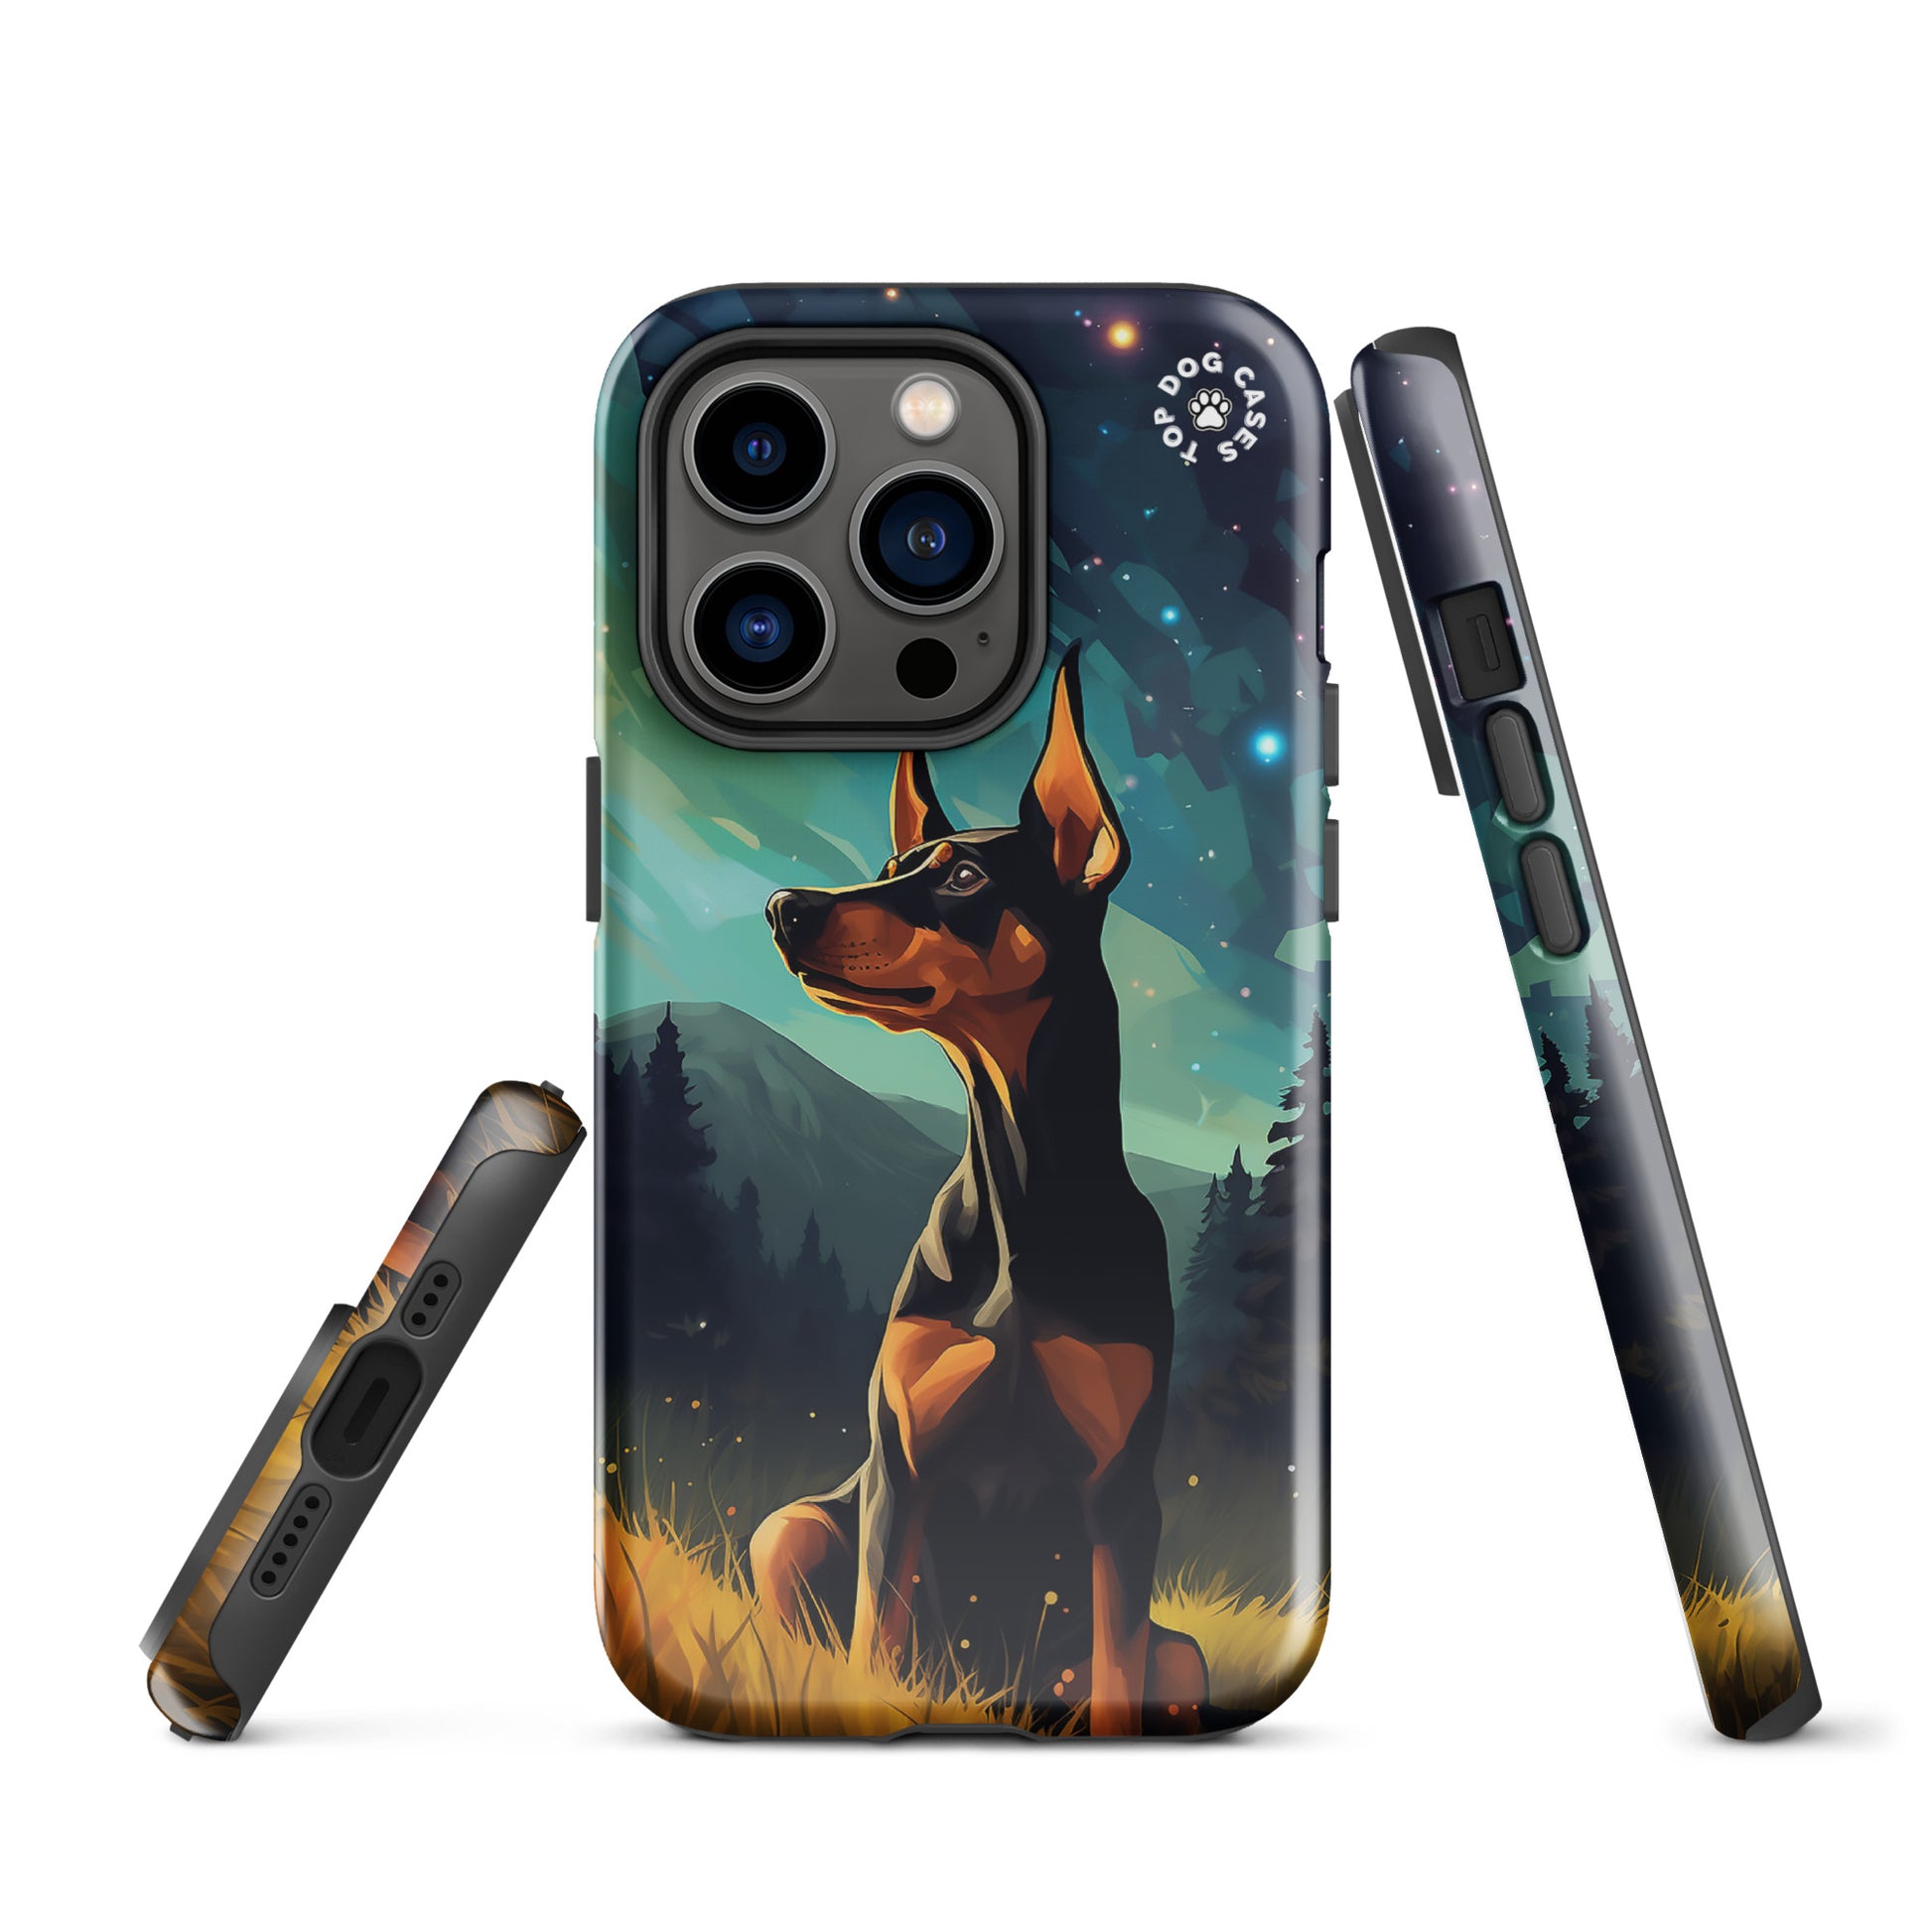 iPhone 14 Case with Doberman - Top Dog Cases - #CuteDog, #CuteDogs, #Doberman, #DogPhoneCase, #dogs, #iPhone14, #iPhone14case, #iPhone14DogCase, #iPhone14Plus, #iPhone14Pluscase, #iPhone14Pro, #iPhone14ProMax, #iPhone14ProMaxCase